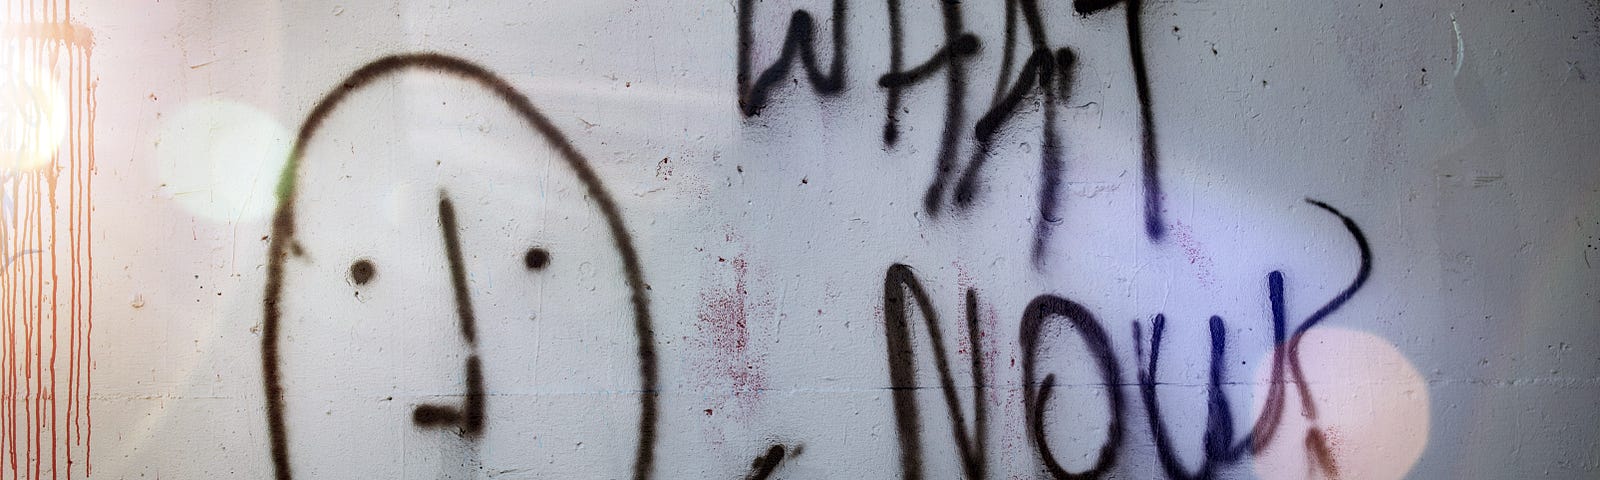 Graffitti on w white wall reads: “What now?” There is a neutral face to the left, manifest as a round circle, two dots for eyes, a straignt line for a mouth, and a simble line nose. Wastewater testing in the United States has discovered the new and highly mutated coronavirus variant BA.2.86. Red, white, and mutated: Unpacking the U.S.’s new Covid variant.